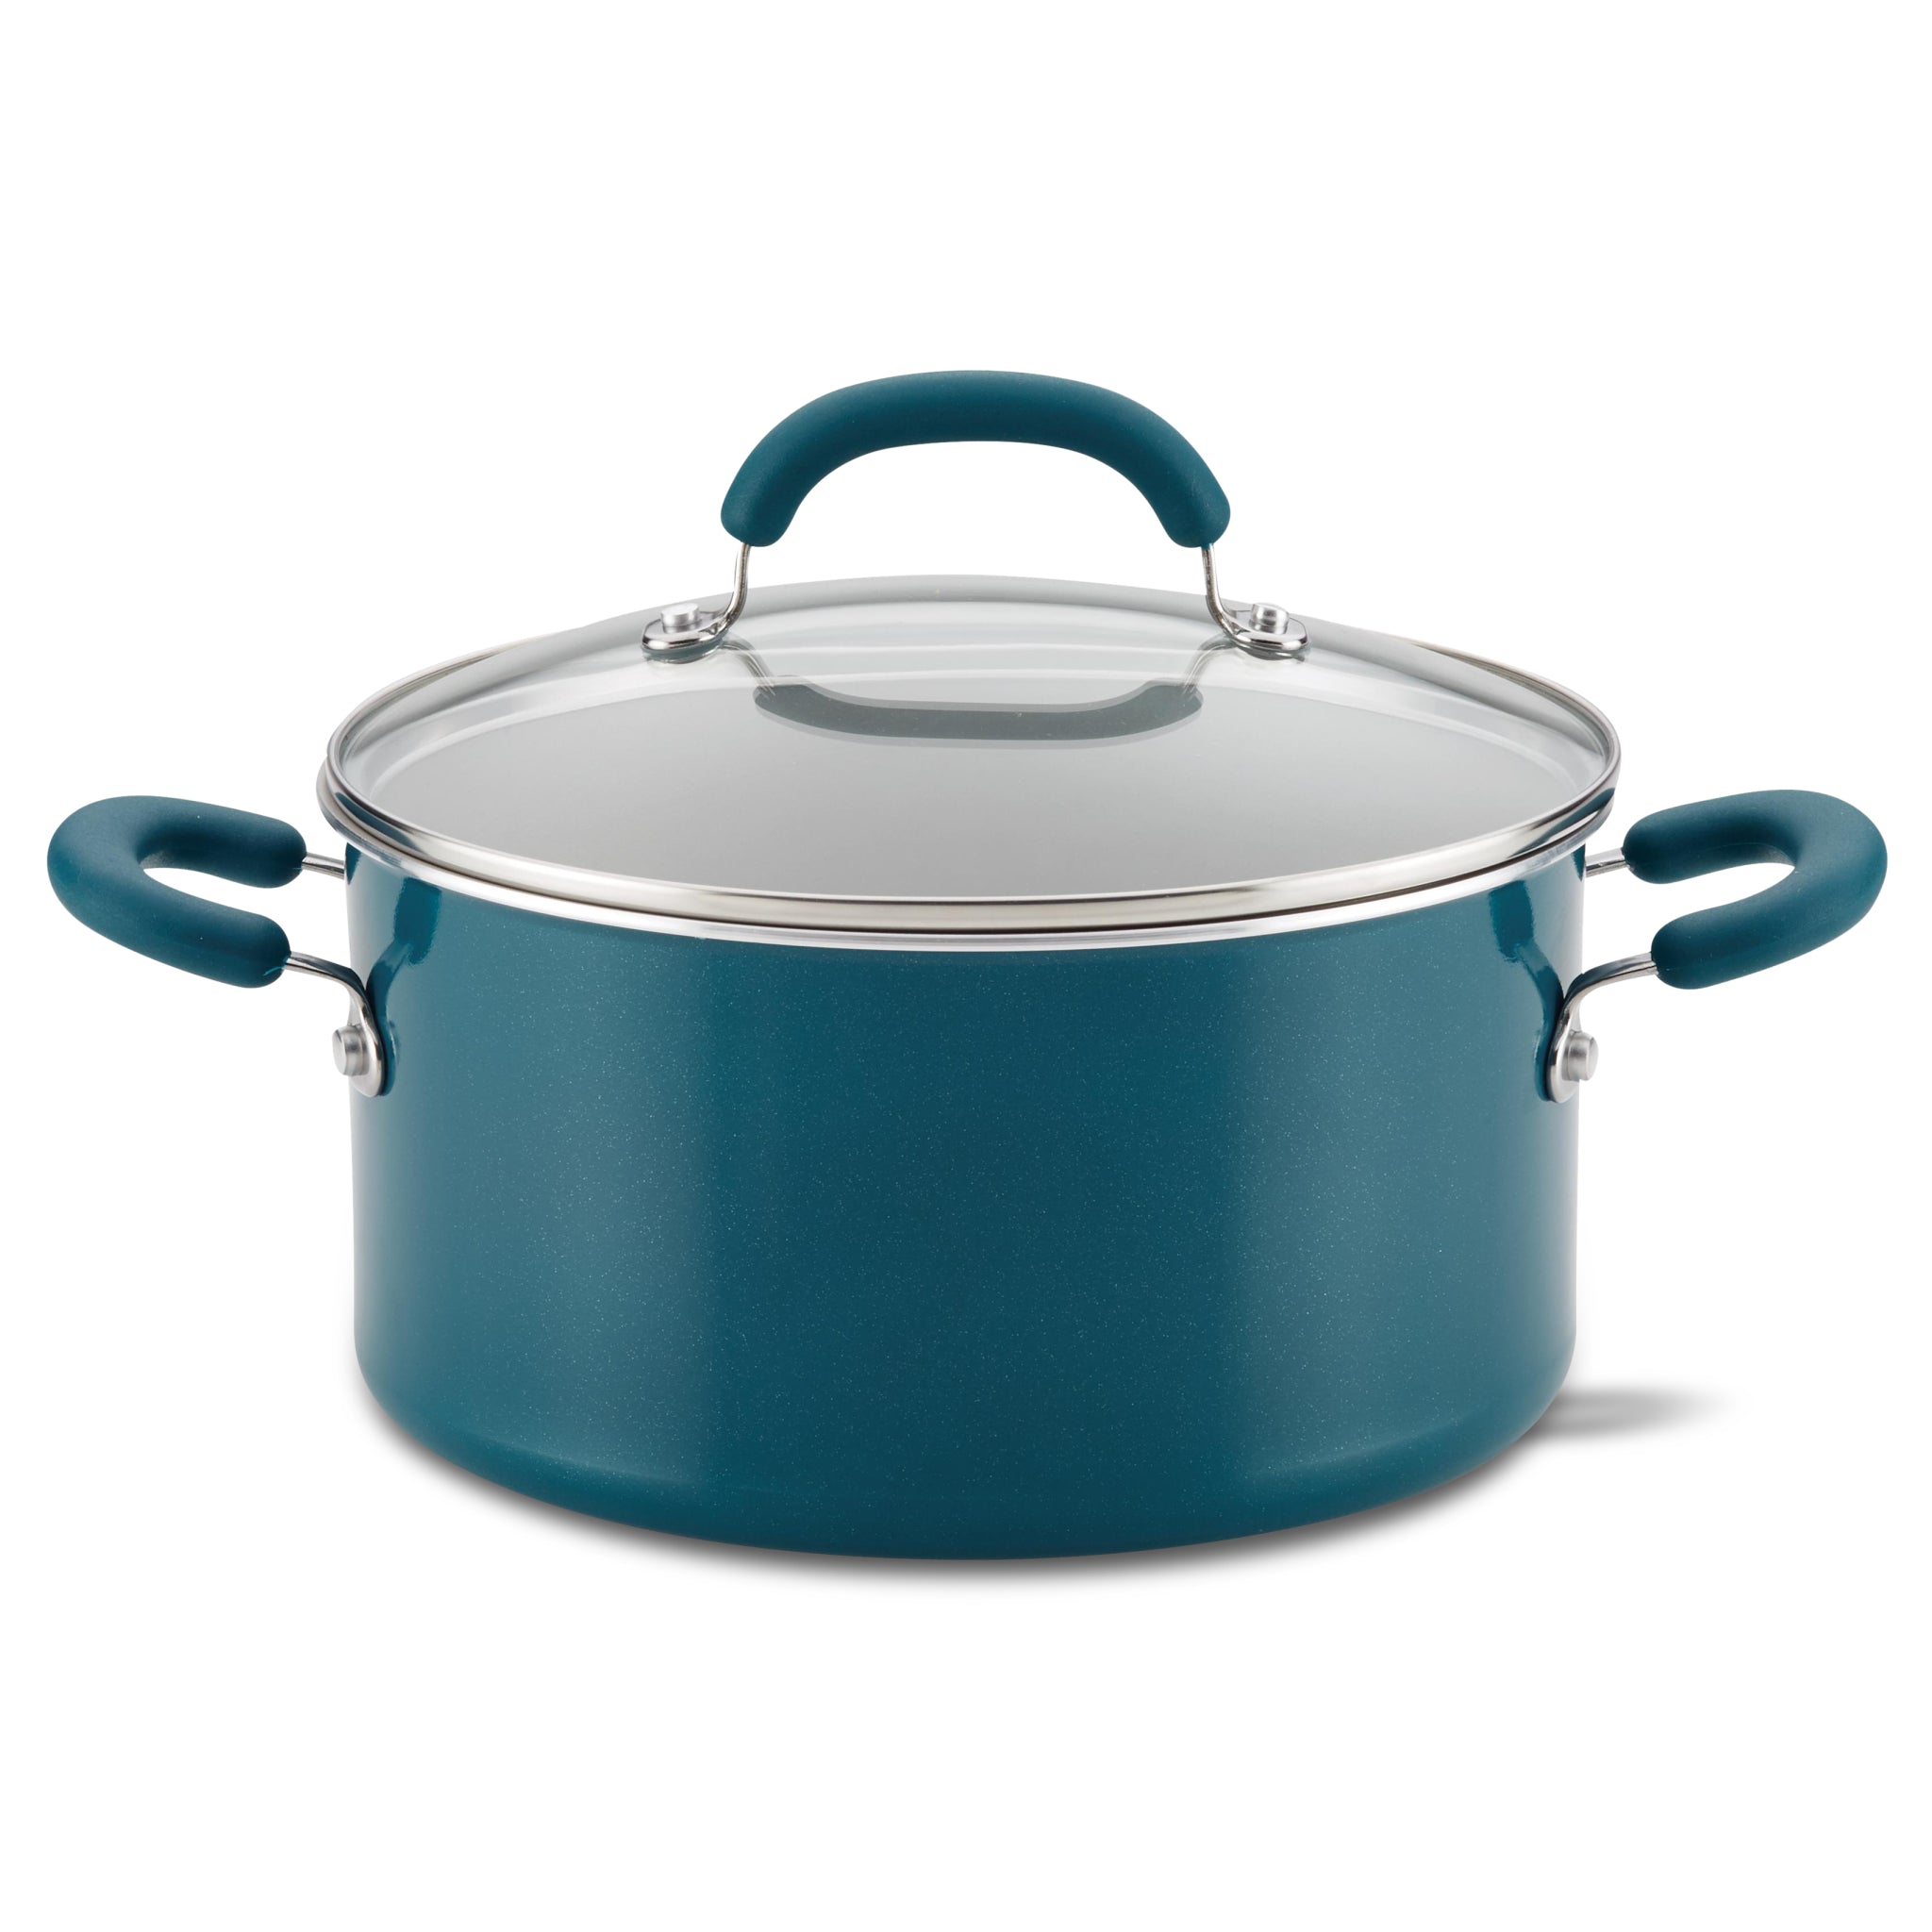 6-Quart Create Delicious Nonstick Induction Covered Stockpot